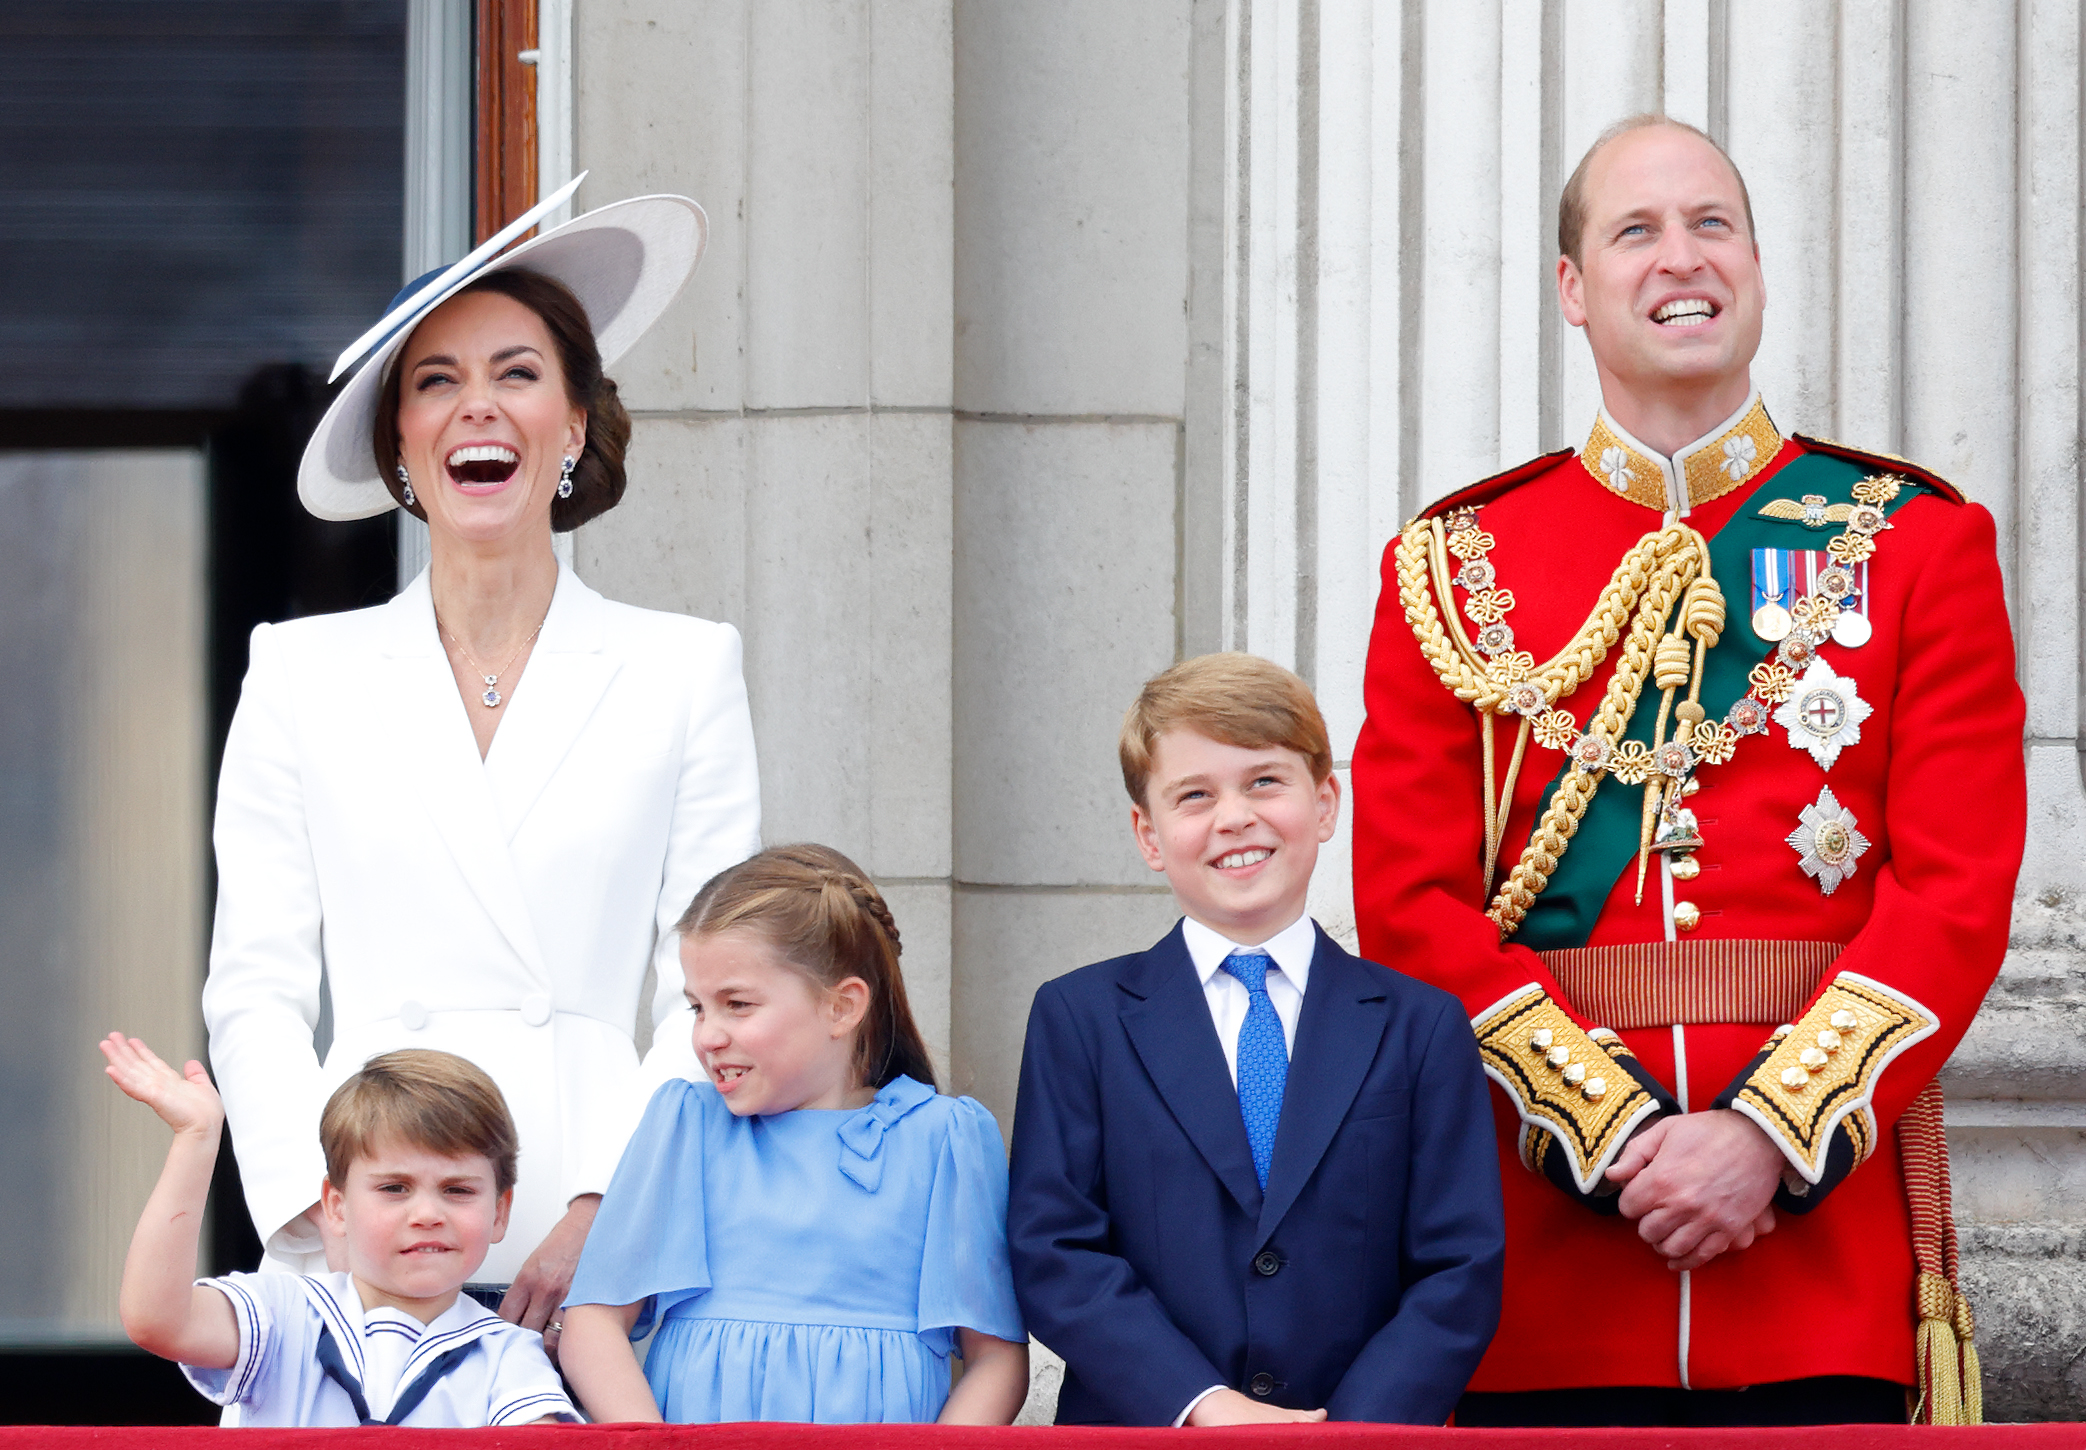 Prince Louis, Kate Middleton, Princess Charlotte, Prince George and Prince William watch a flypast from the balcony of Buckingham Palace during Trooping the Color on June 2, 2022 in London, England. | Source: Getty Images